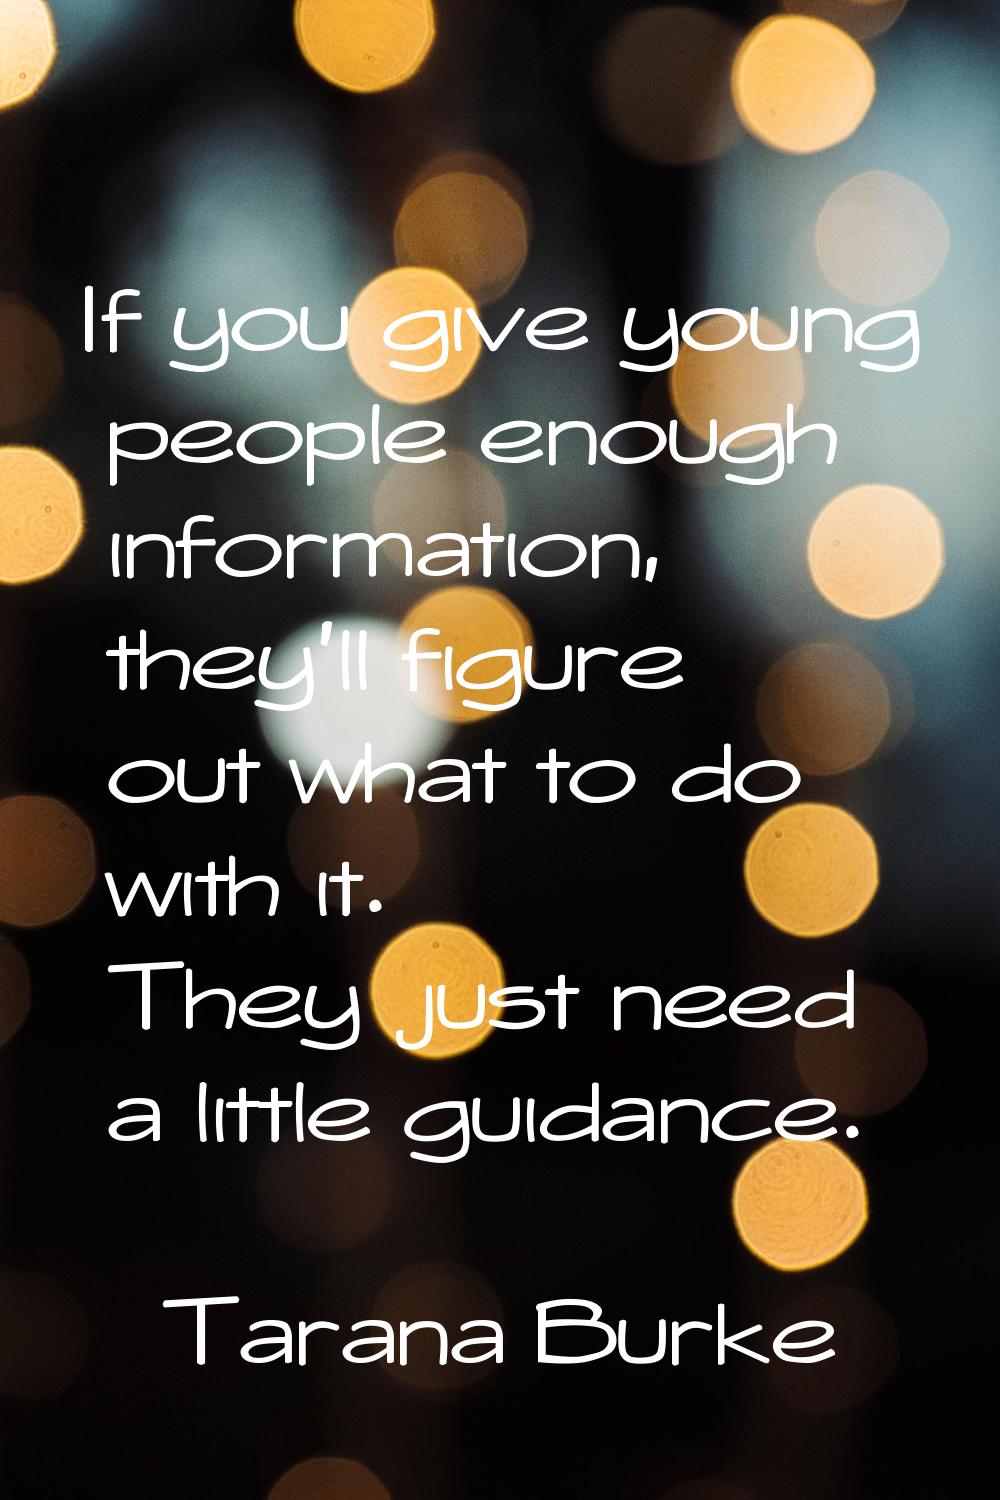 If you give young people enough information, they'll figure out what to do with it. They just need 